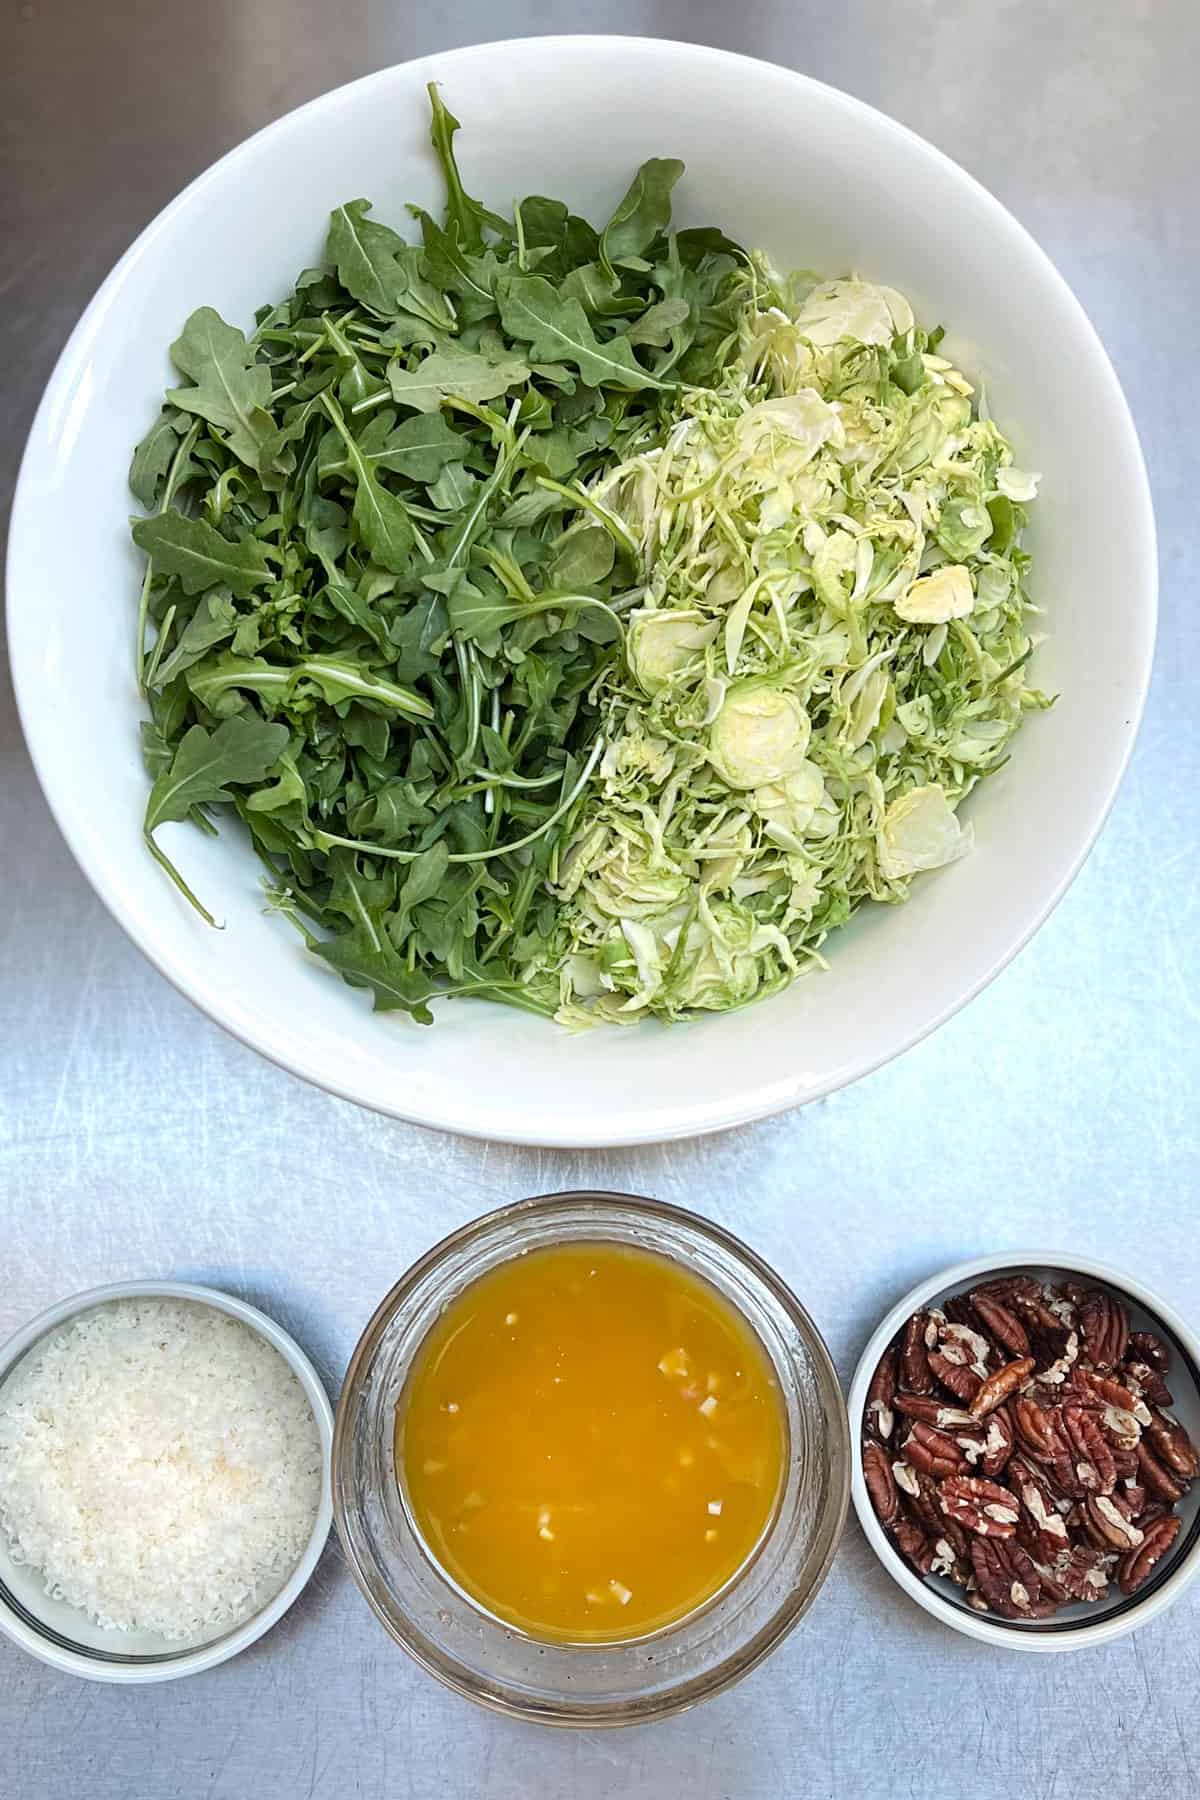 Overhead shot of a white bowl half filled with arugula the other half shredded brussels sprouts, three smalls bowls next to it with grated parmesan, vinaigrette, and toasted pecans